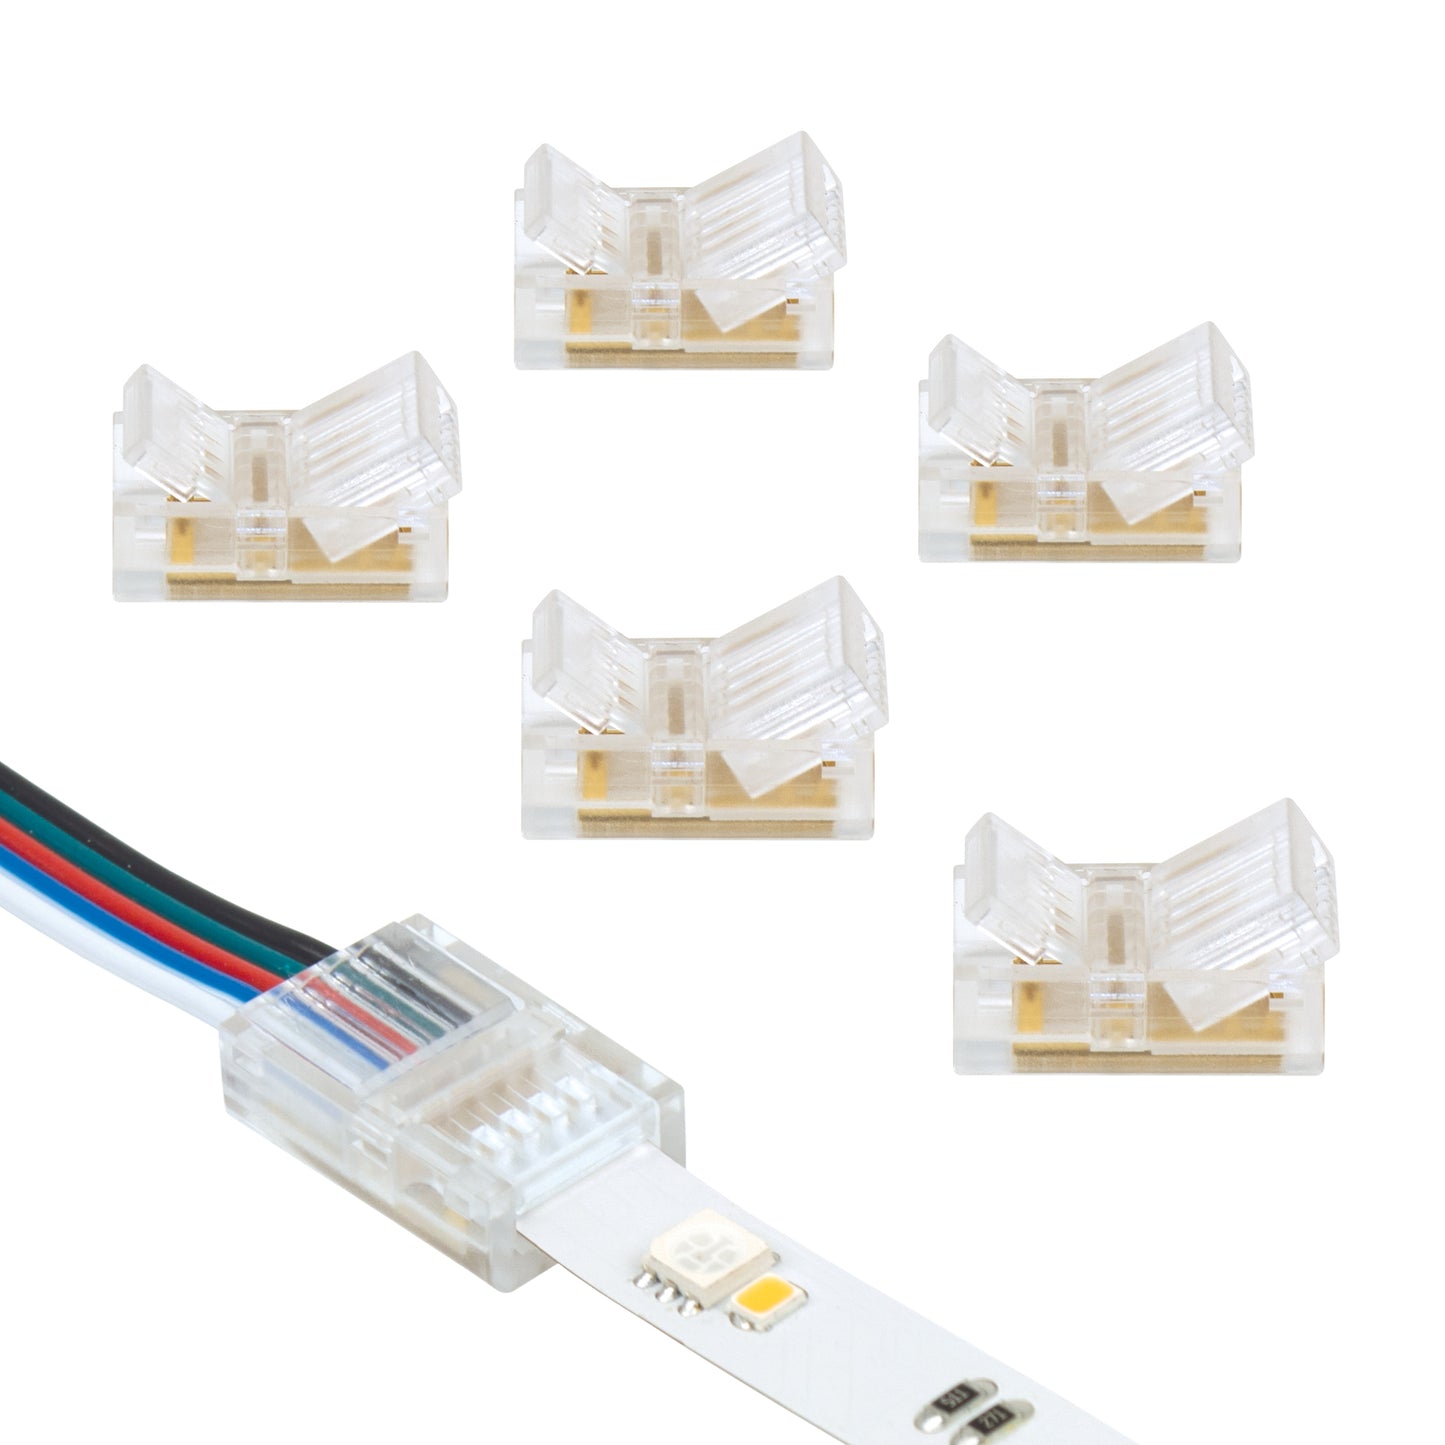 5 Pin LED Strip Light RGB+W Wire to Tape Connector